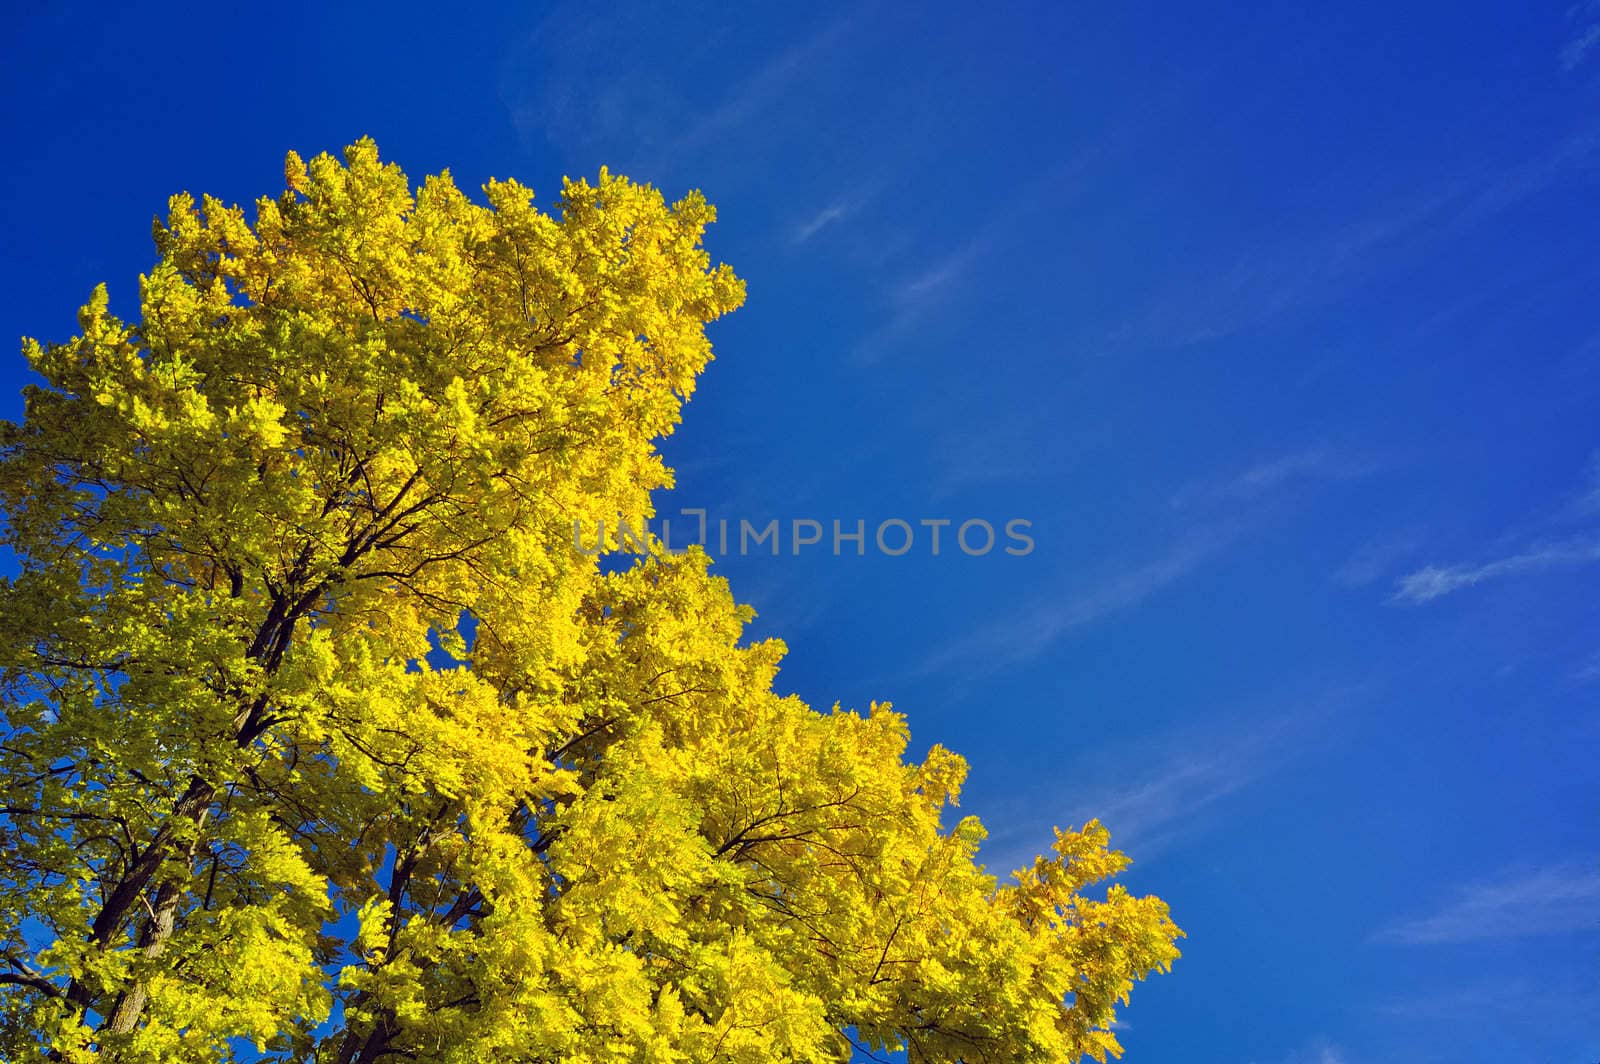 Tree and sky by Bateleur